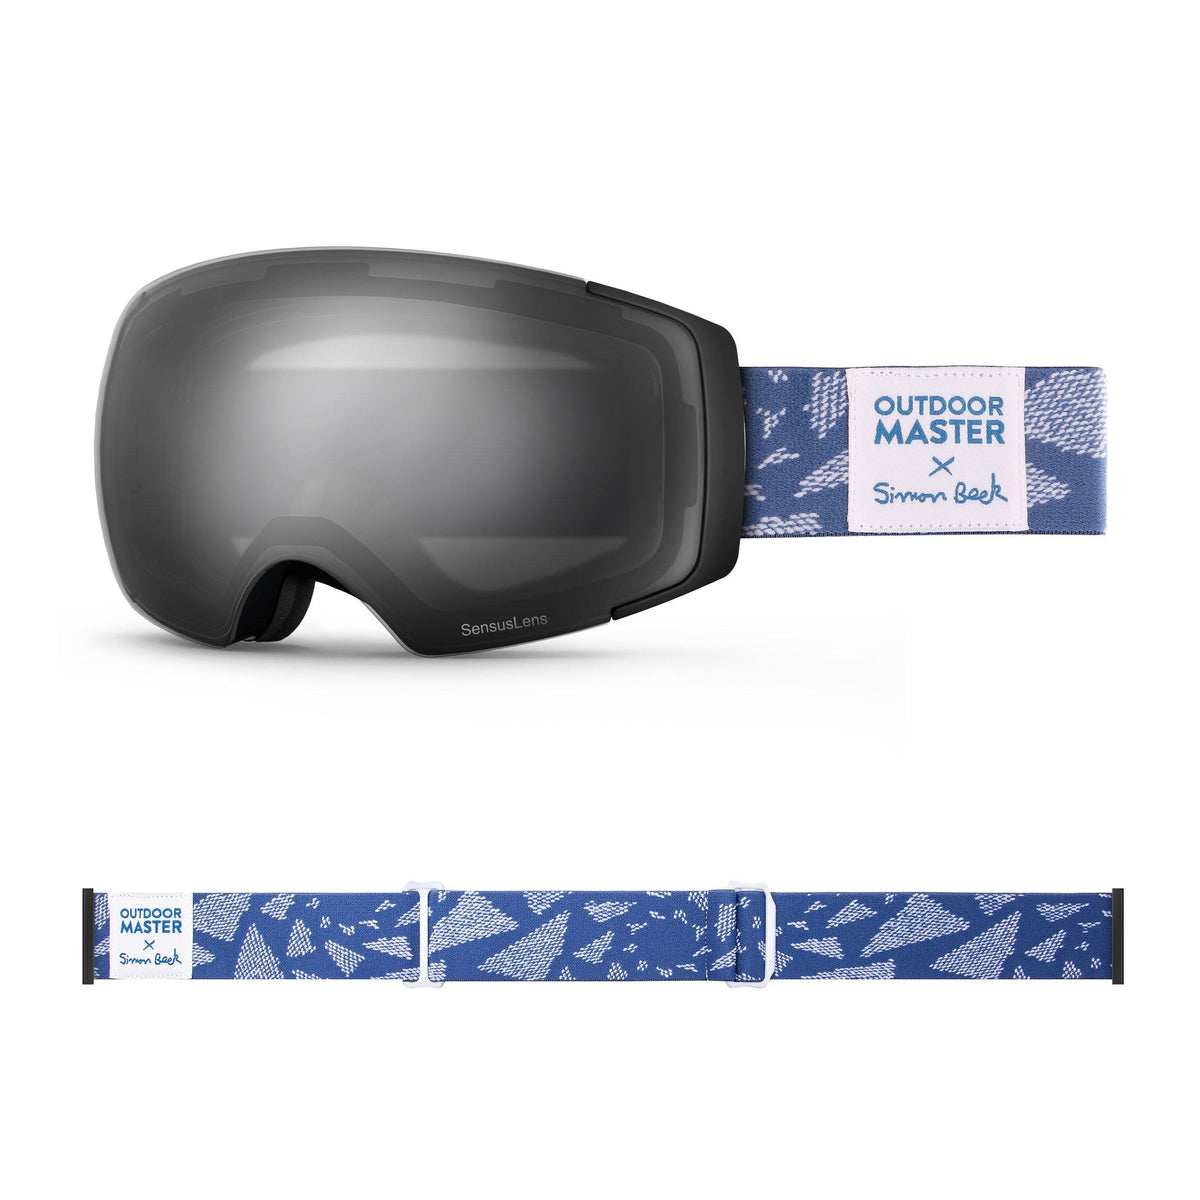 OutdoorMaster x Simon Beck Ski Goggles Pro Series - Snowshoeing Art Limited Edition OutdoorMaster GreenLens VLT 10% TAC Grey With REVO Silver Polarized Flying Triangles